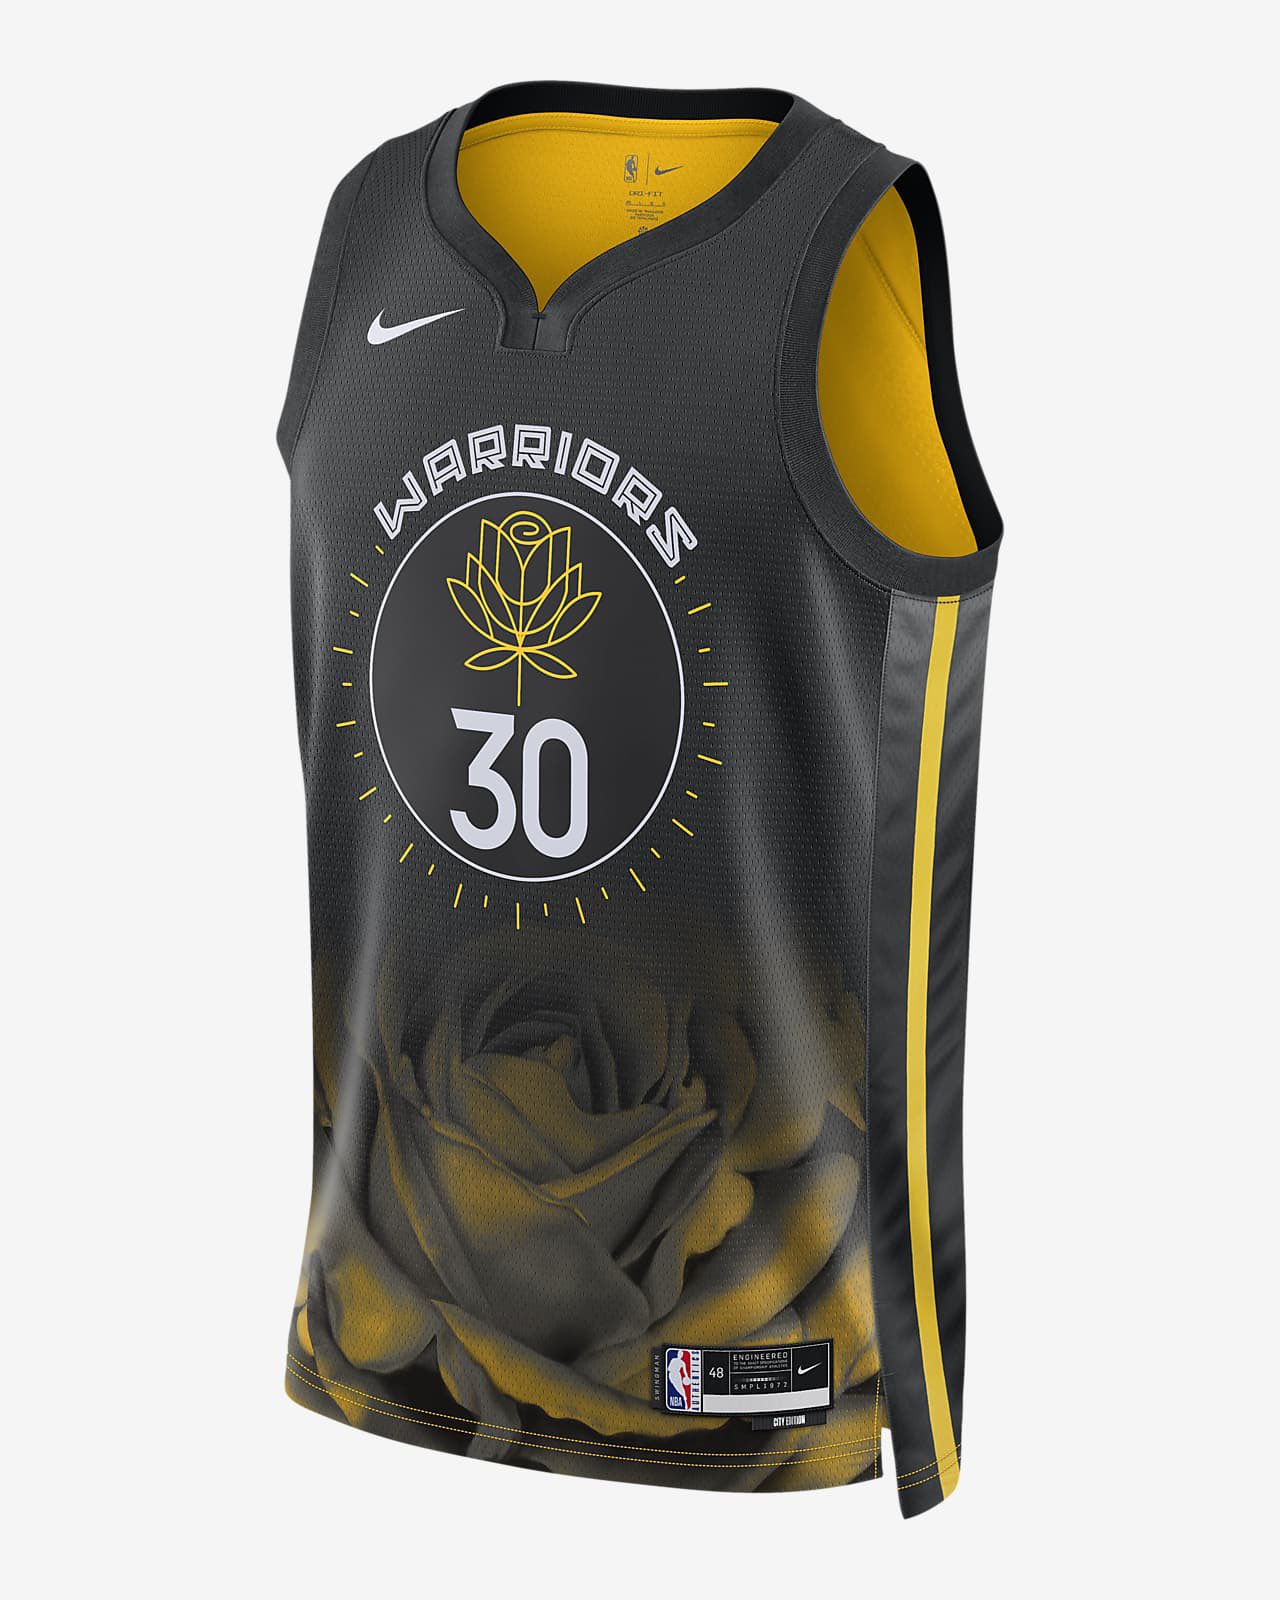 Warriors “The Town” alternate jersey is leaked, and it is beautiful - Golden  State Of Mind